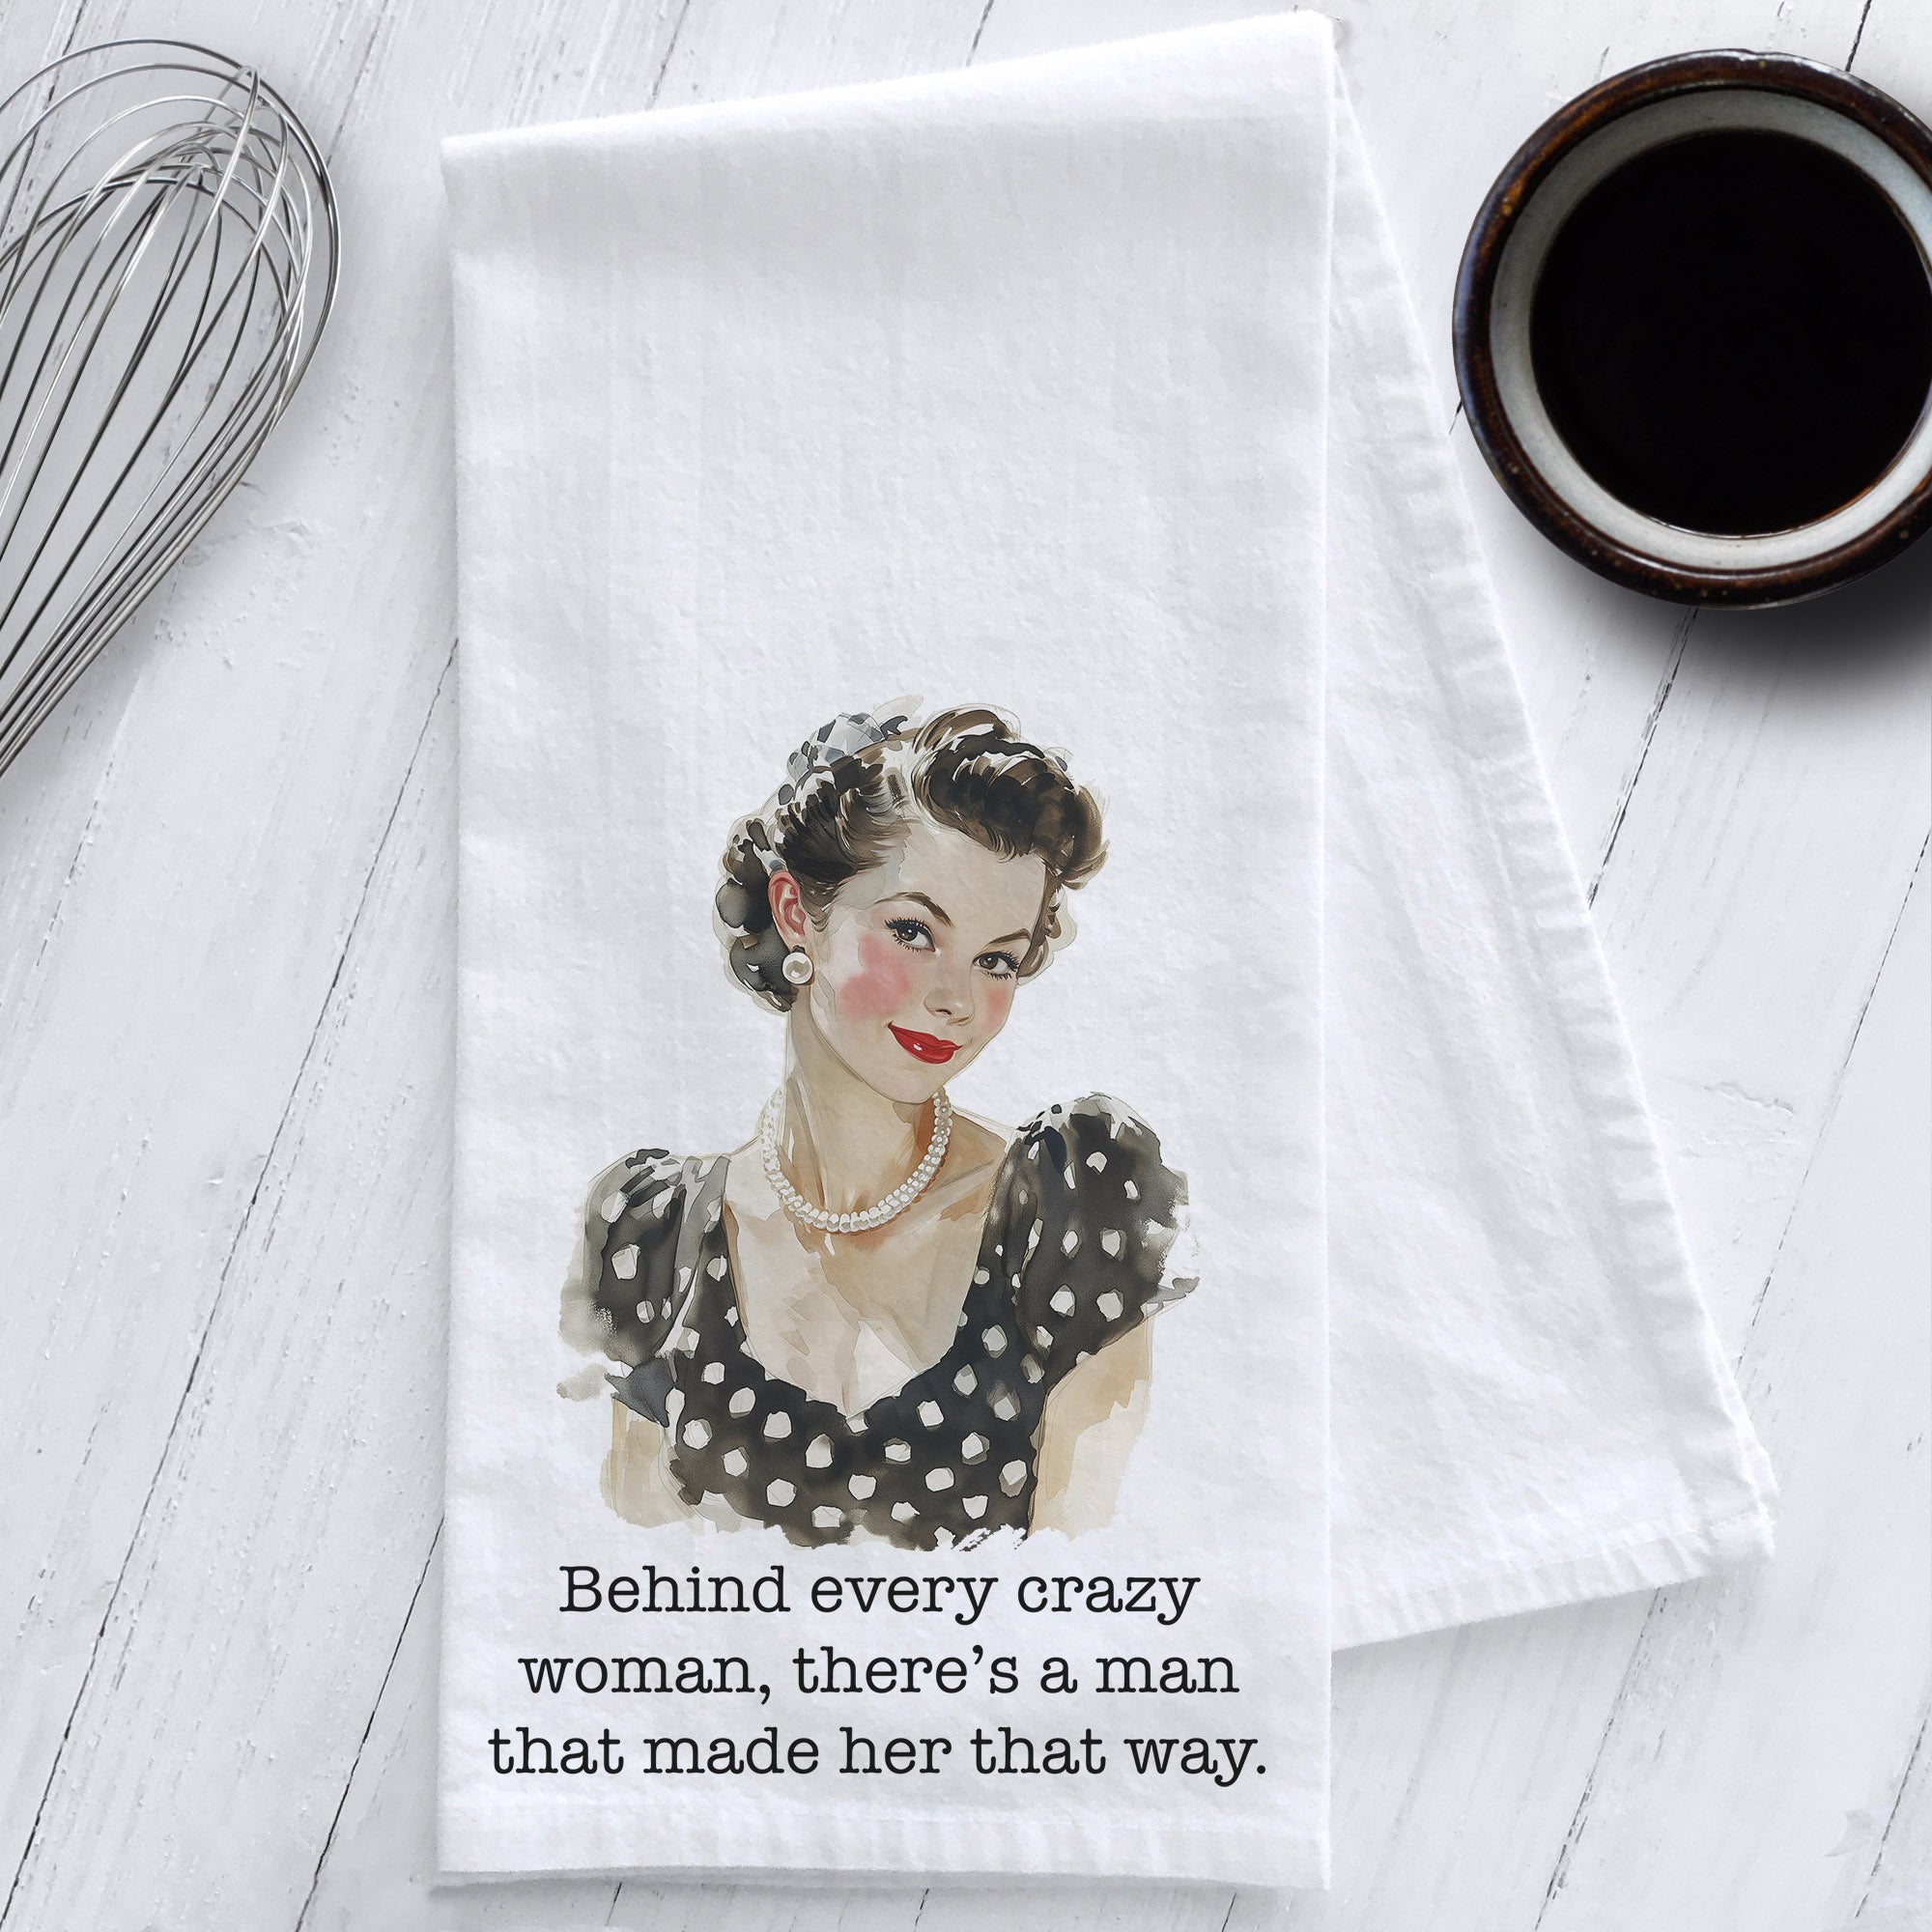 Behind every crazy woman, there’s a man that made her that way Sassy Retro Tea Towel